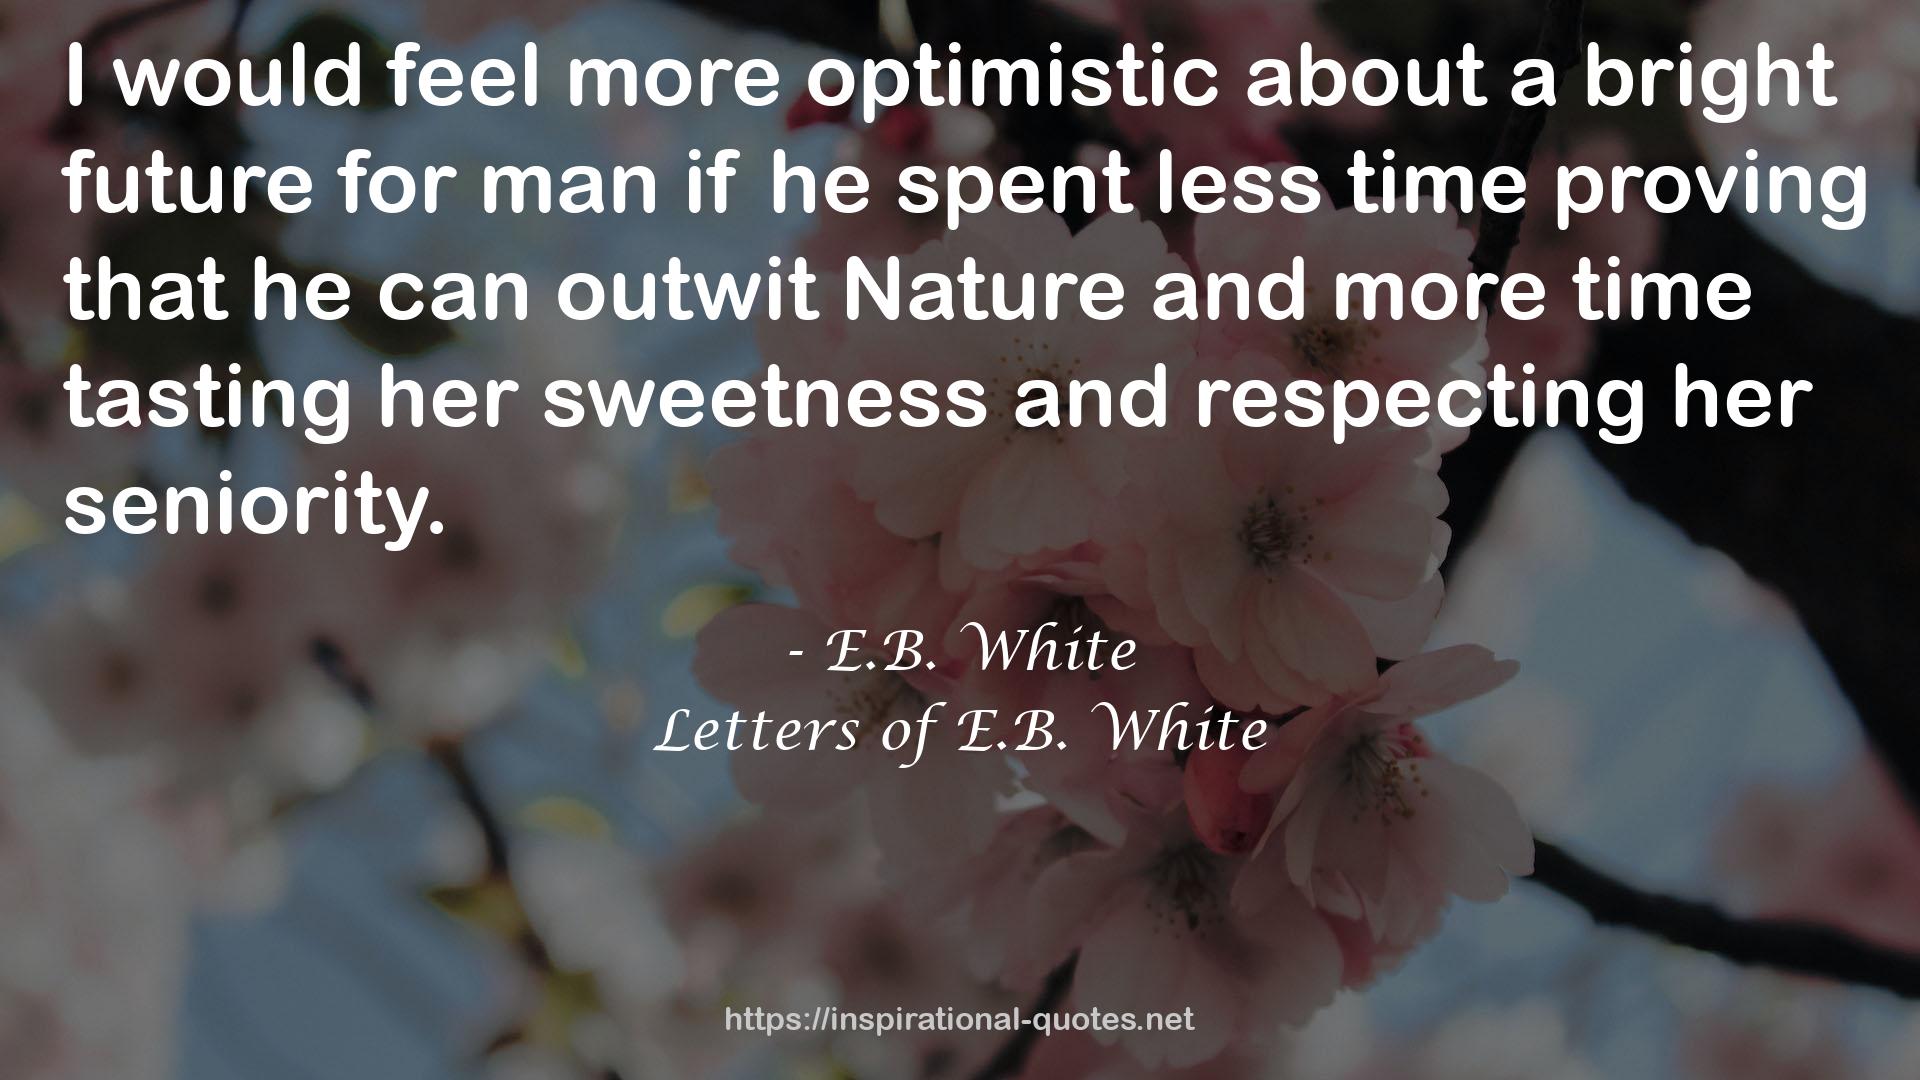 Letters of E.B. White QUOTES